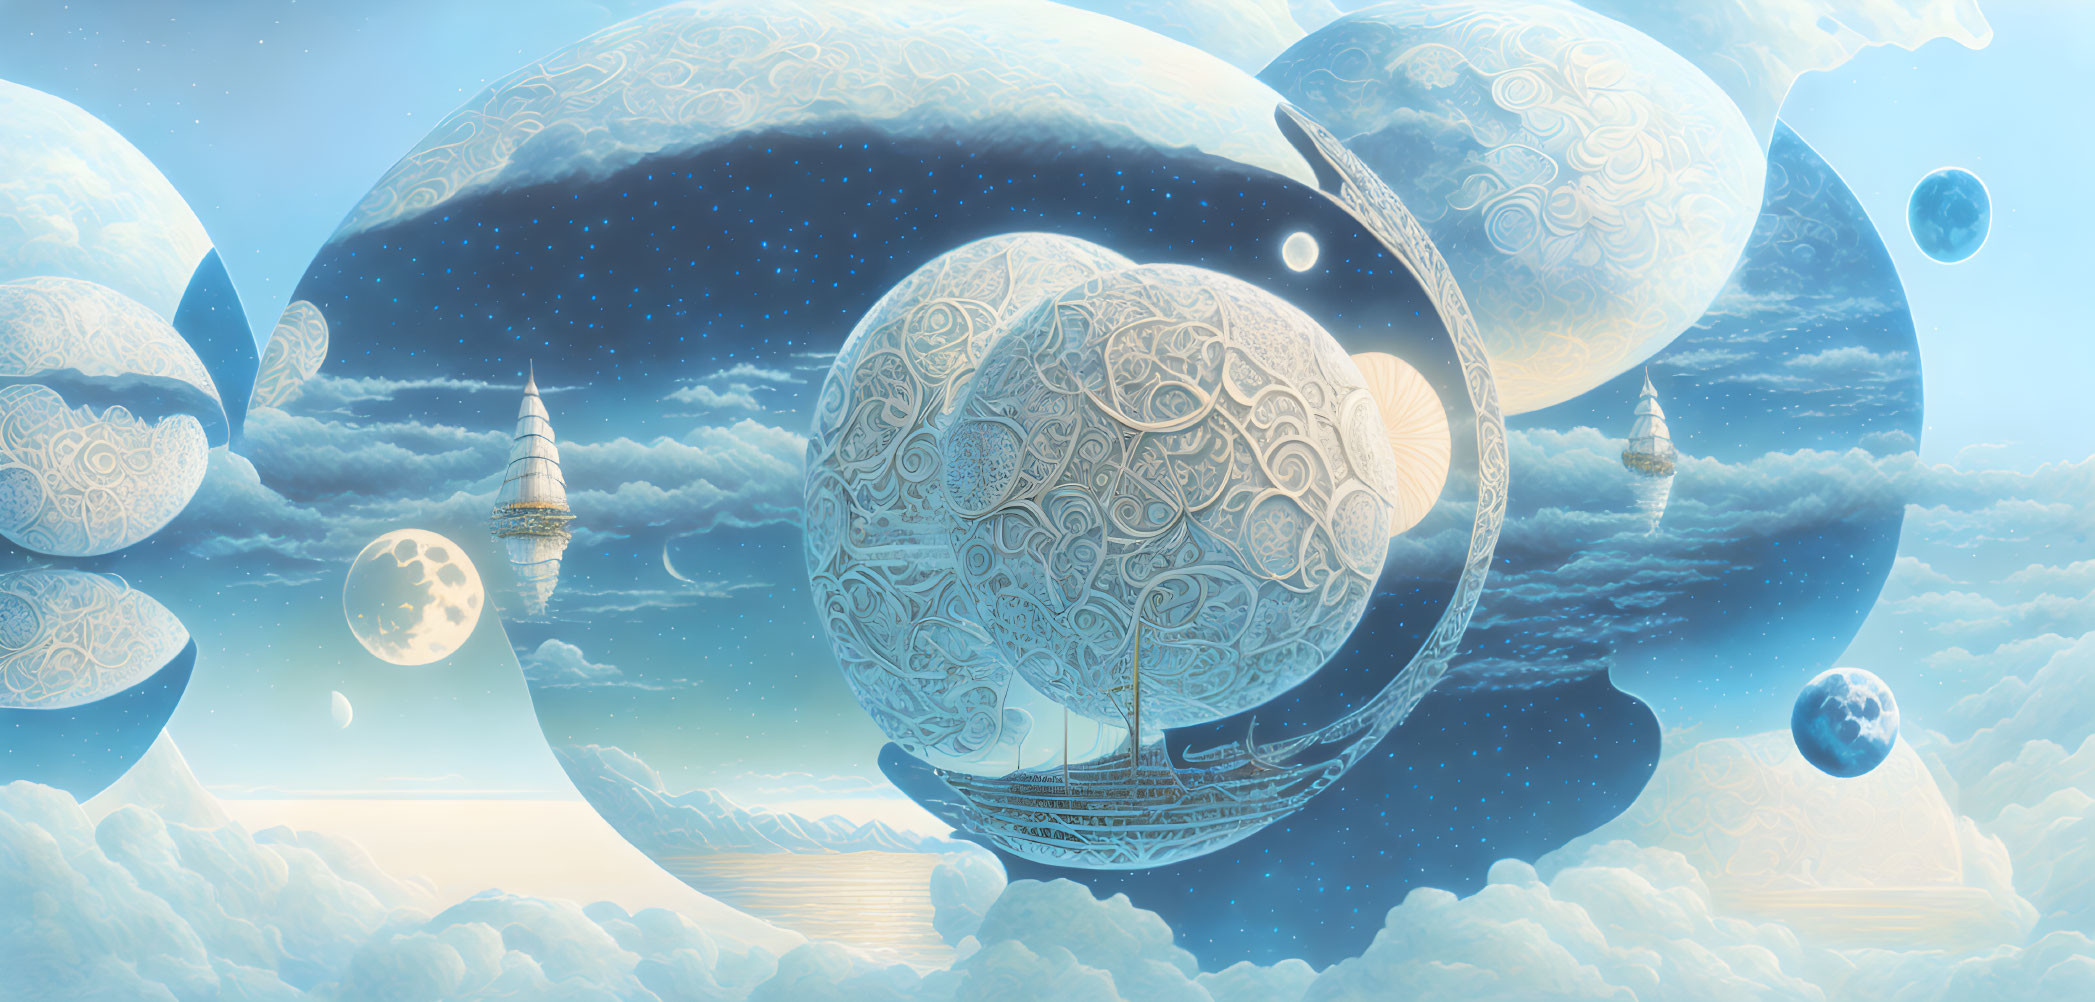 Fantasy landscape with celestial spheres floating among clouds